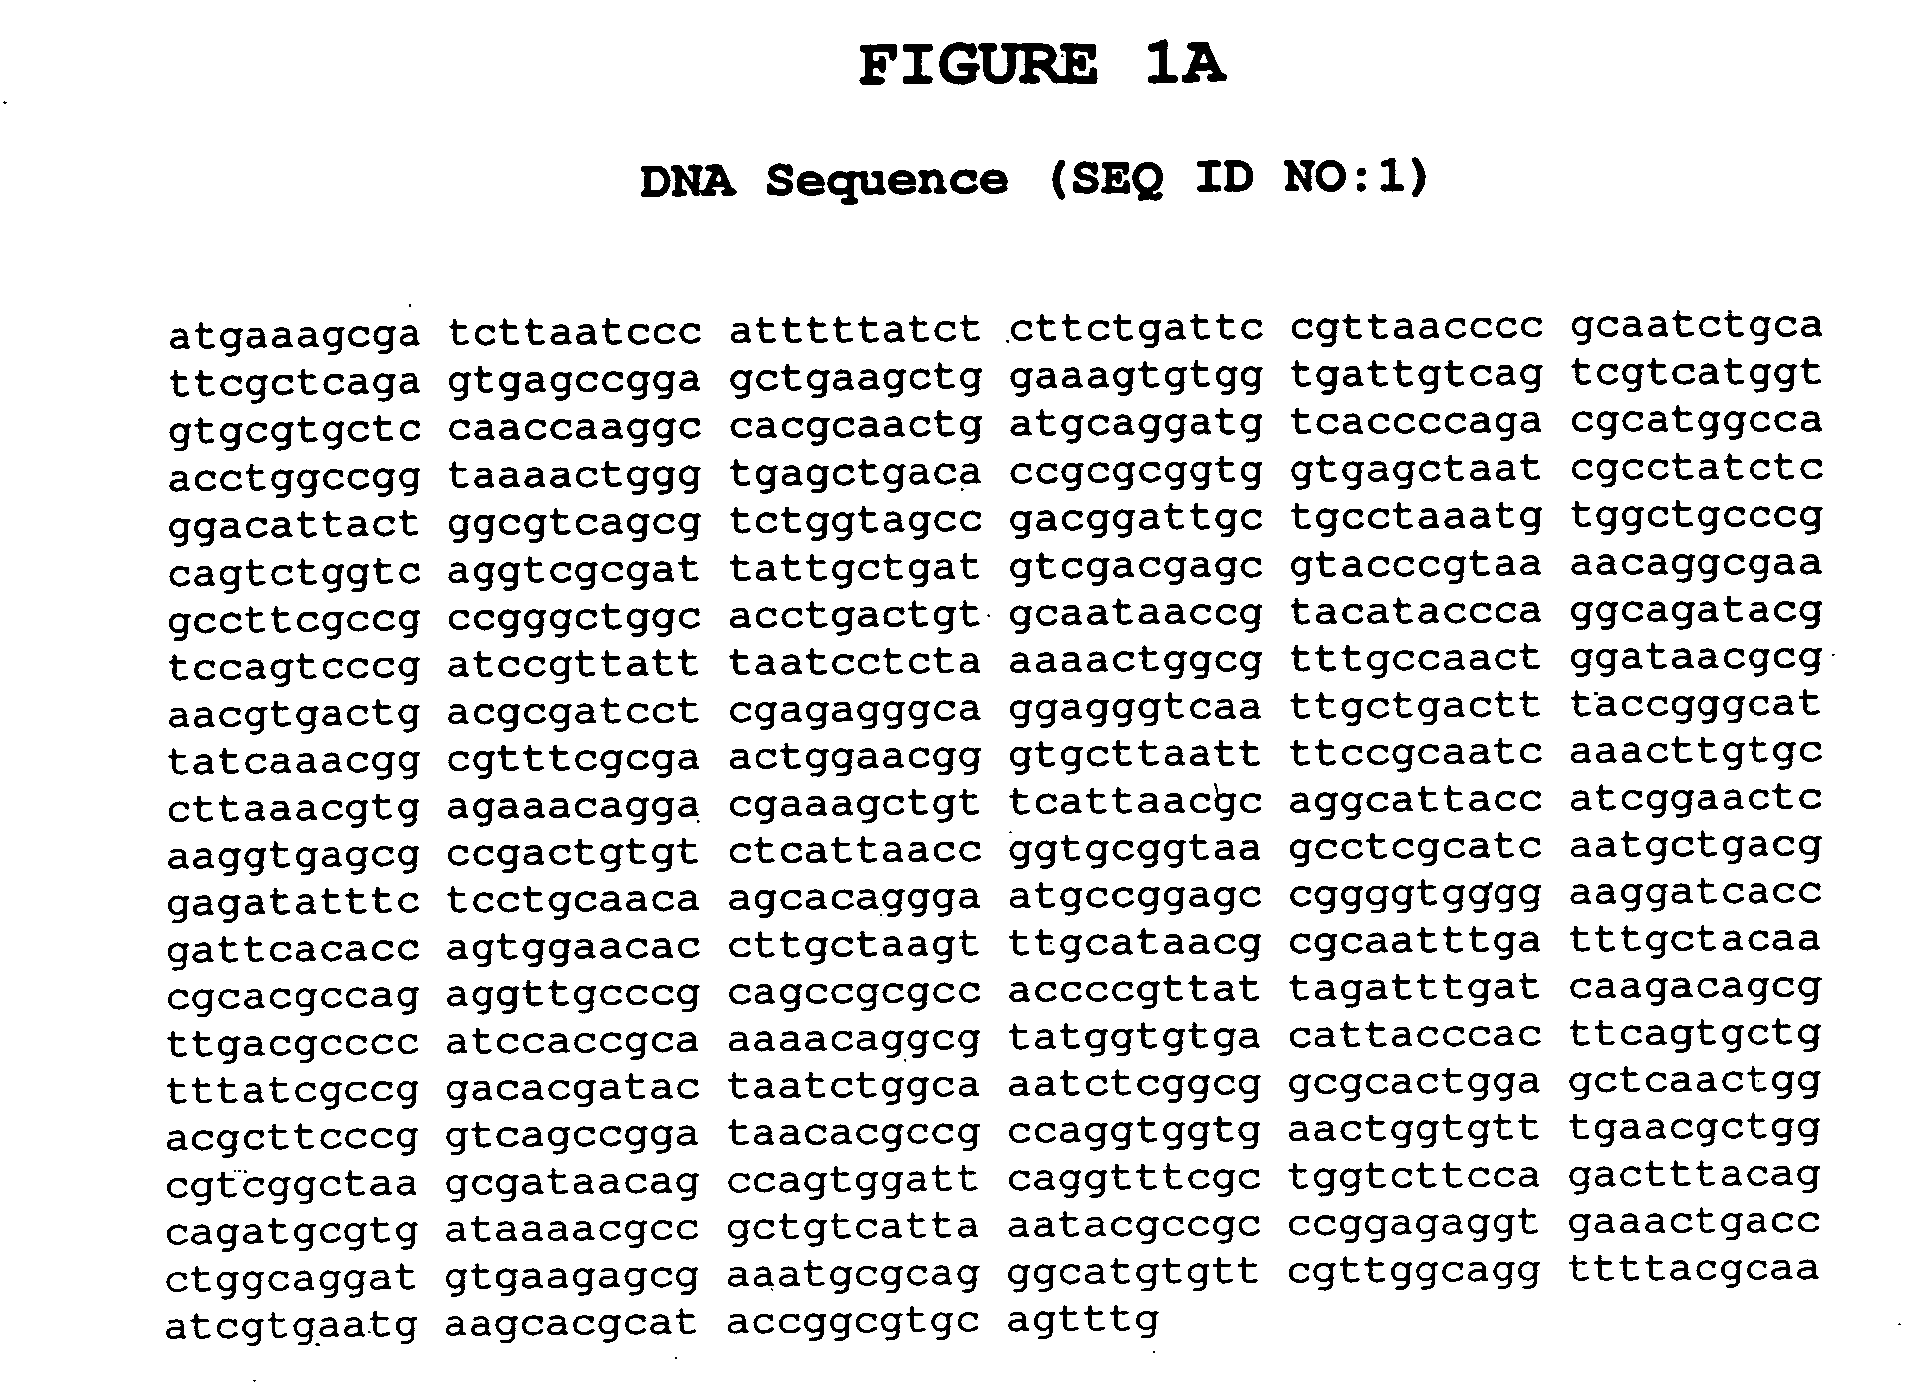 Phytases, nucleic acids encoding them and methods for making and using them